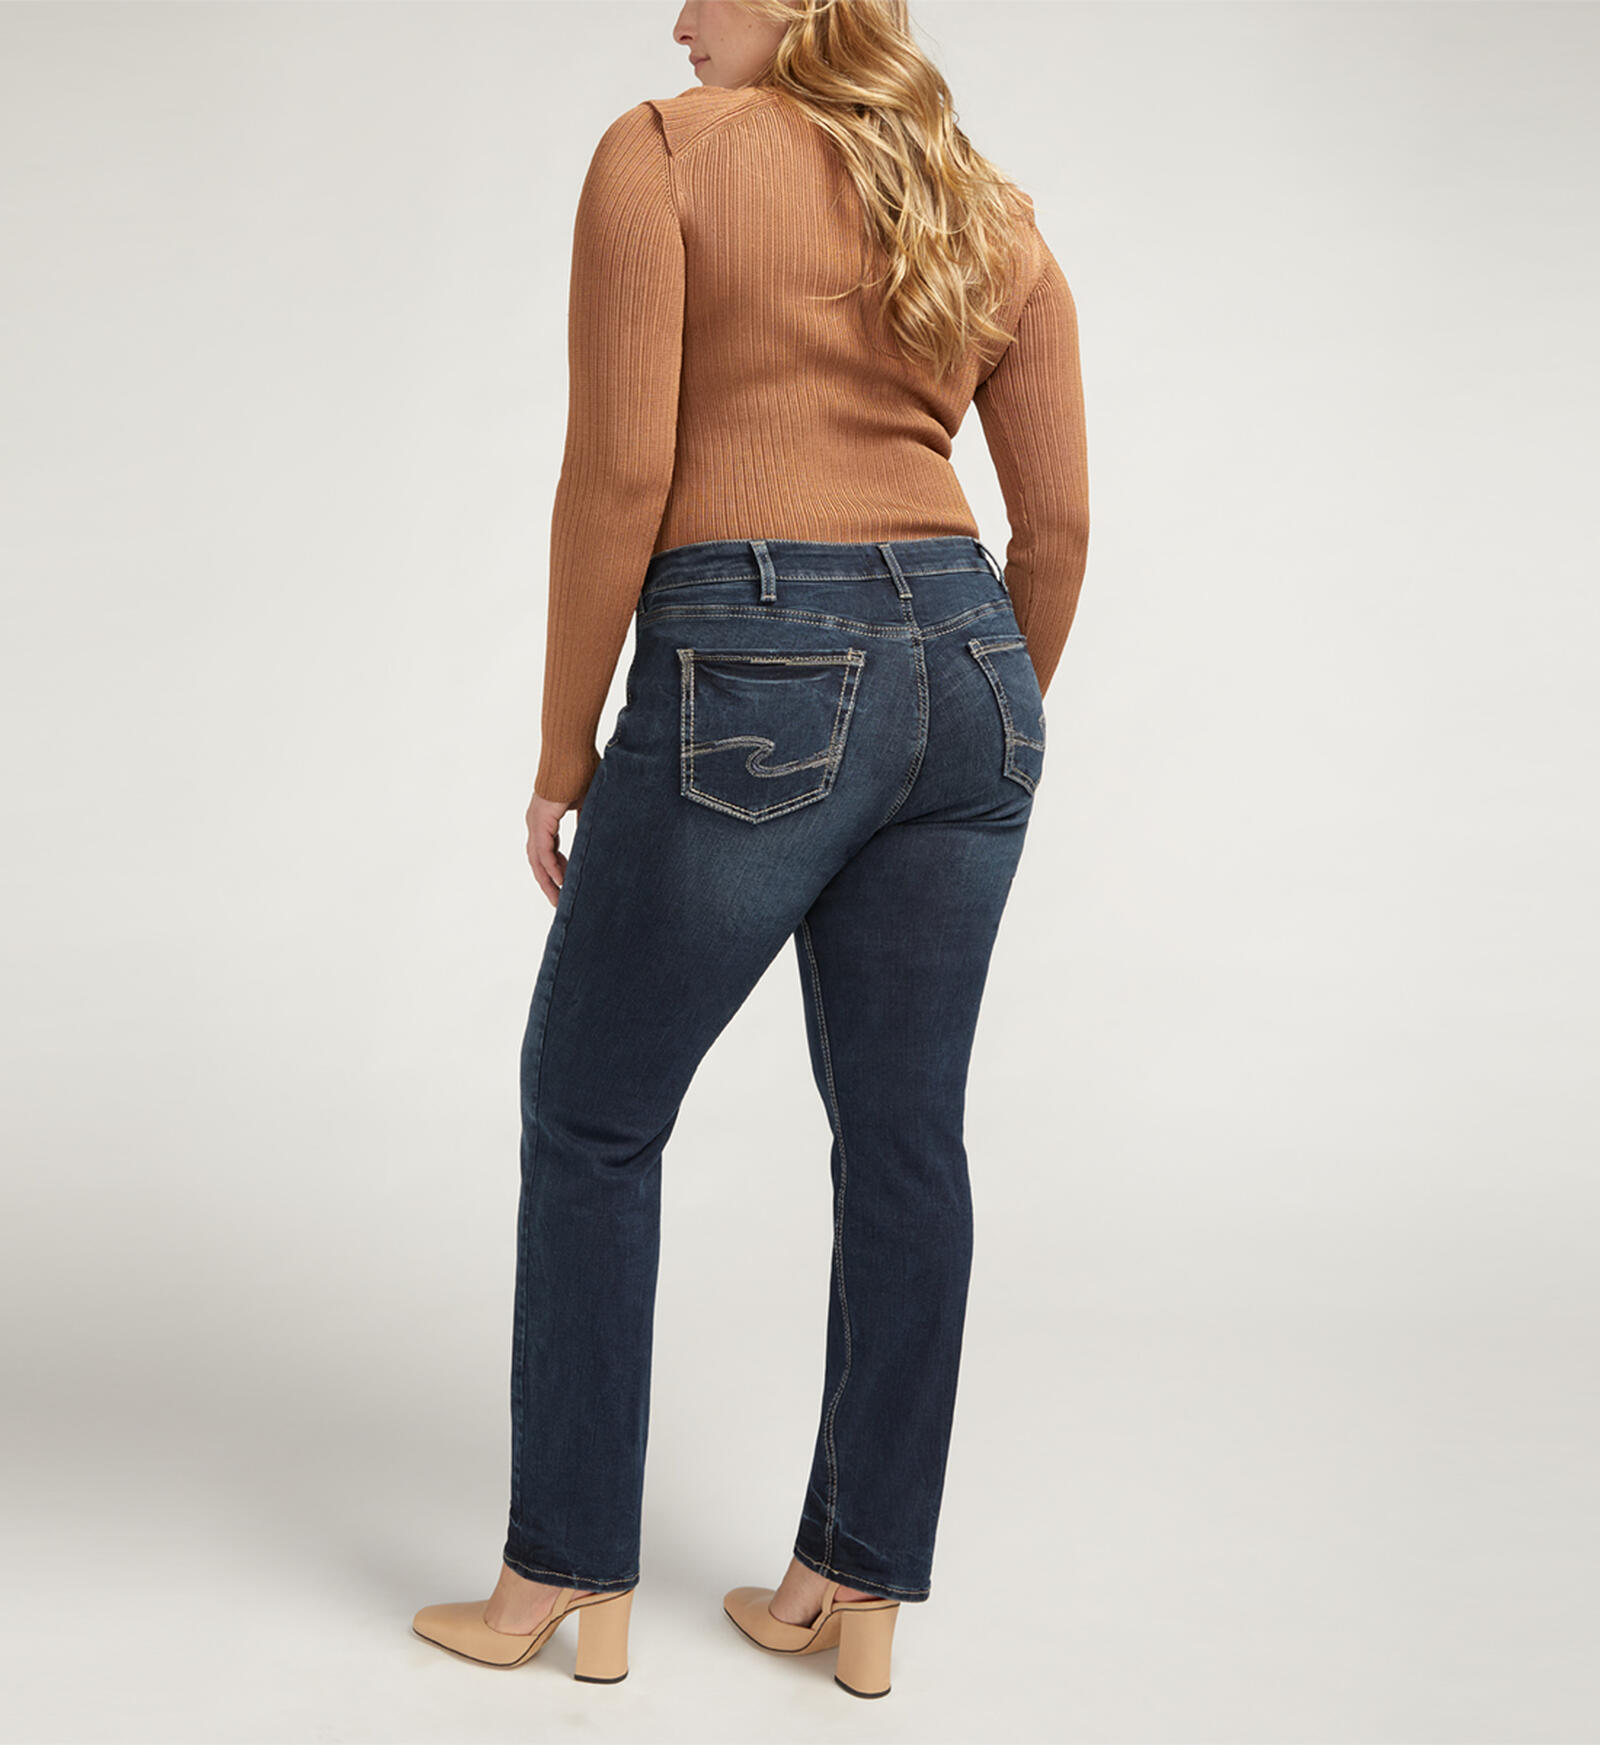 Buy Infinite Fit High Rise Straight Leg Jeans Plus Size for USD